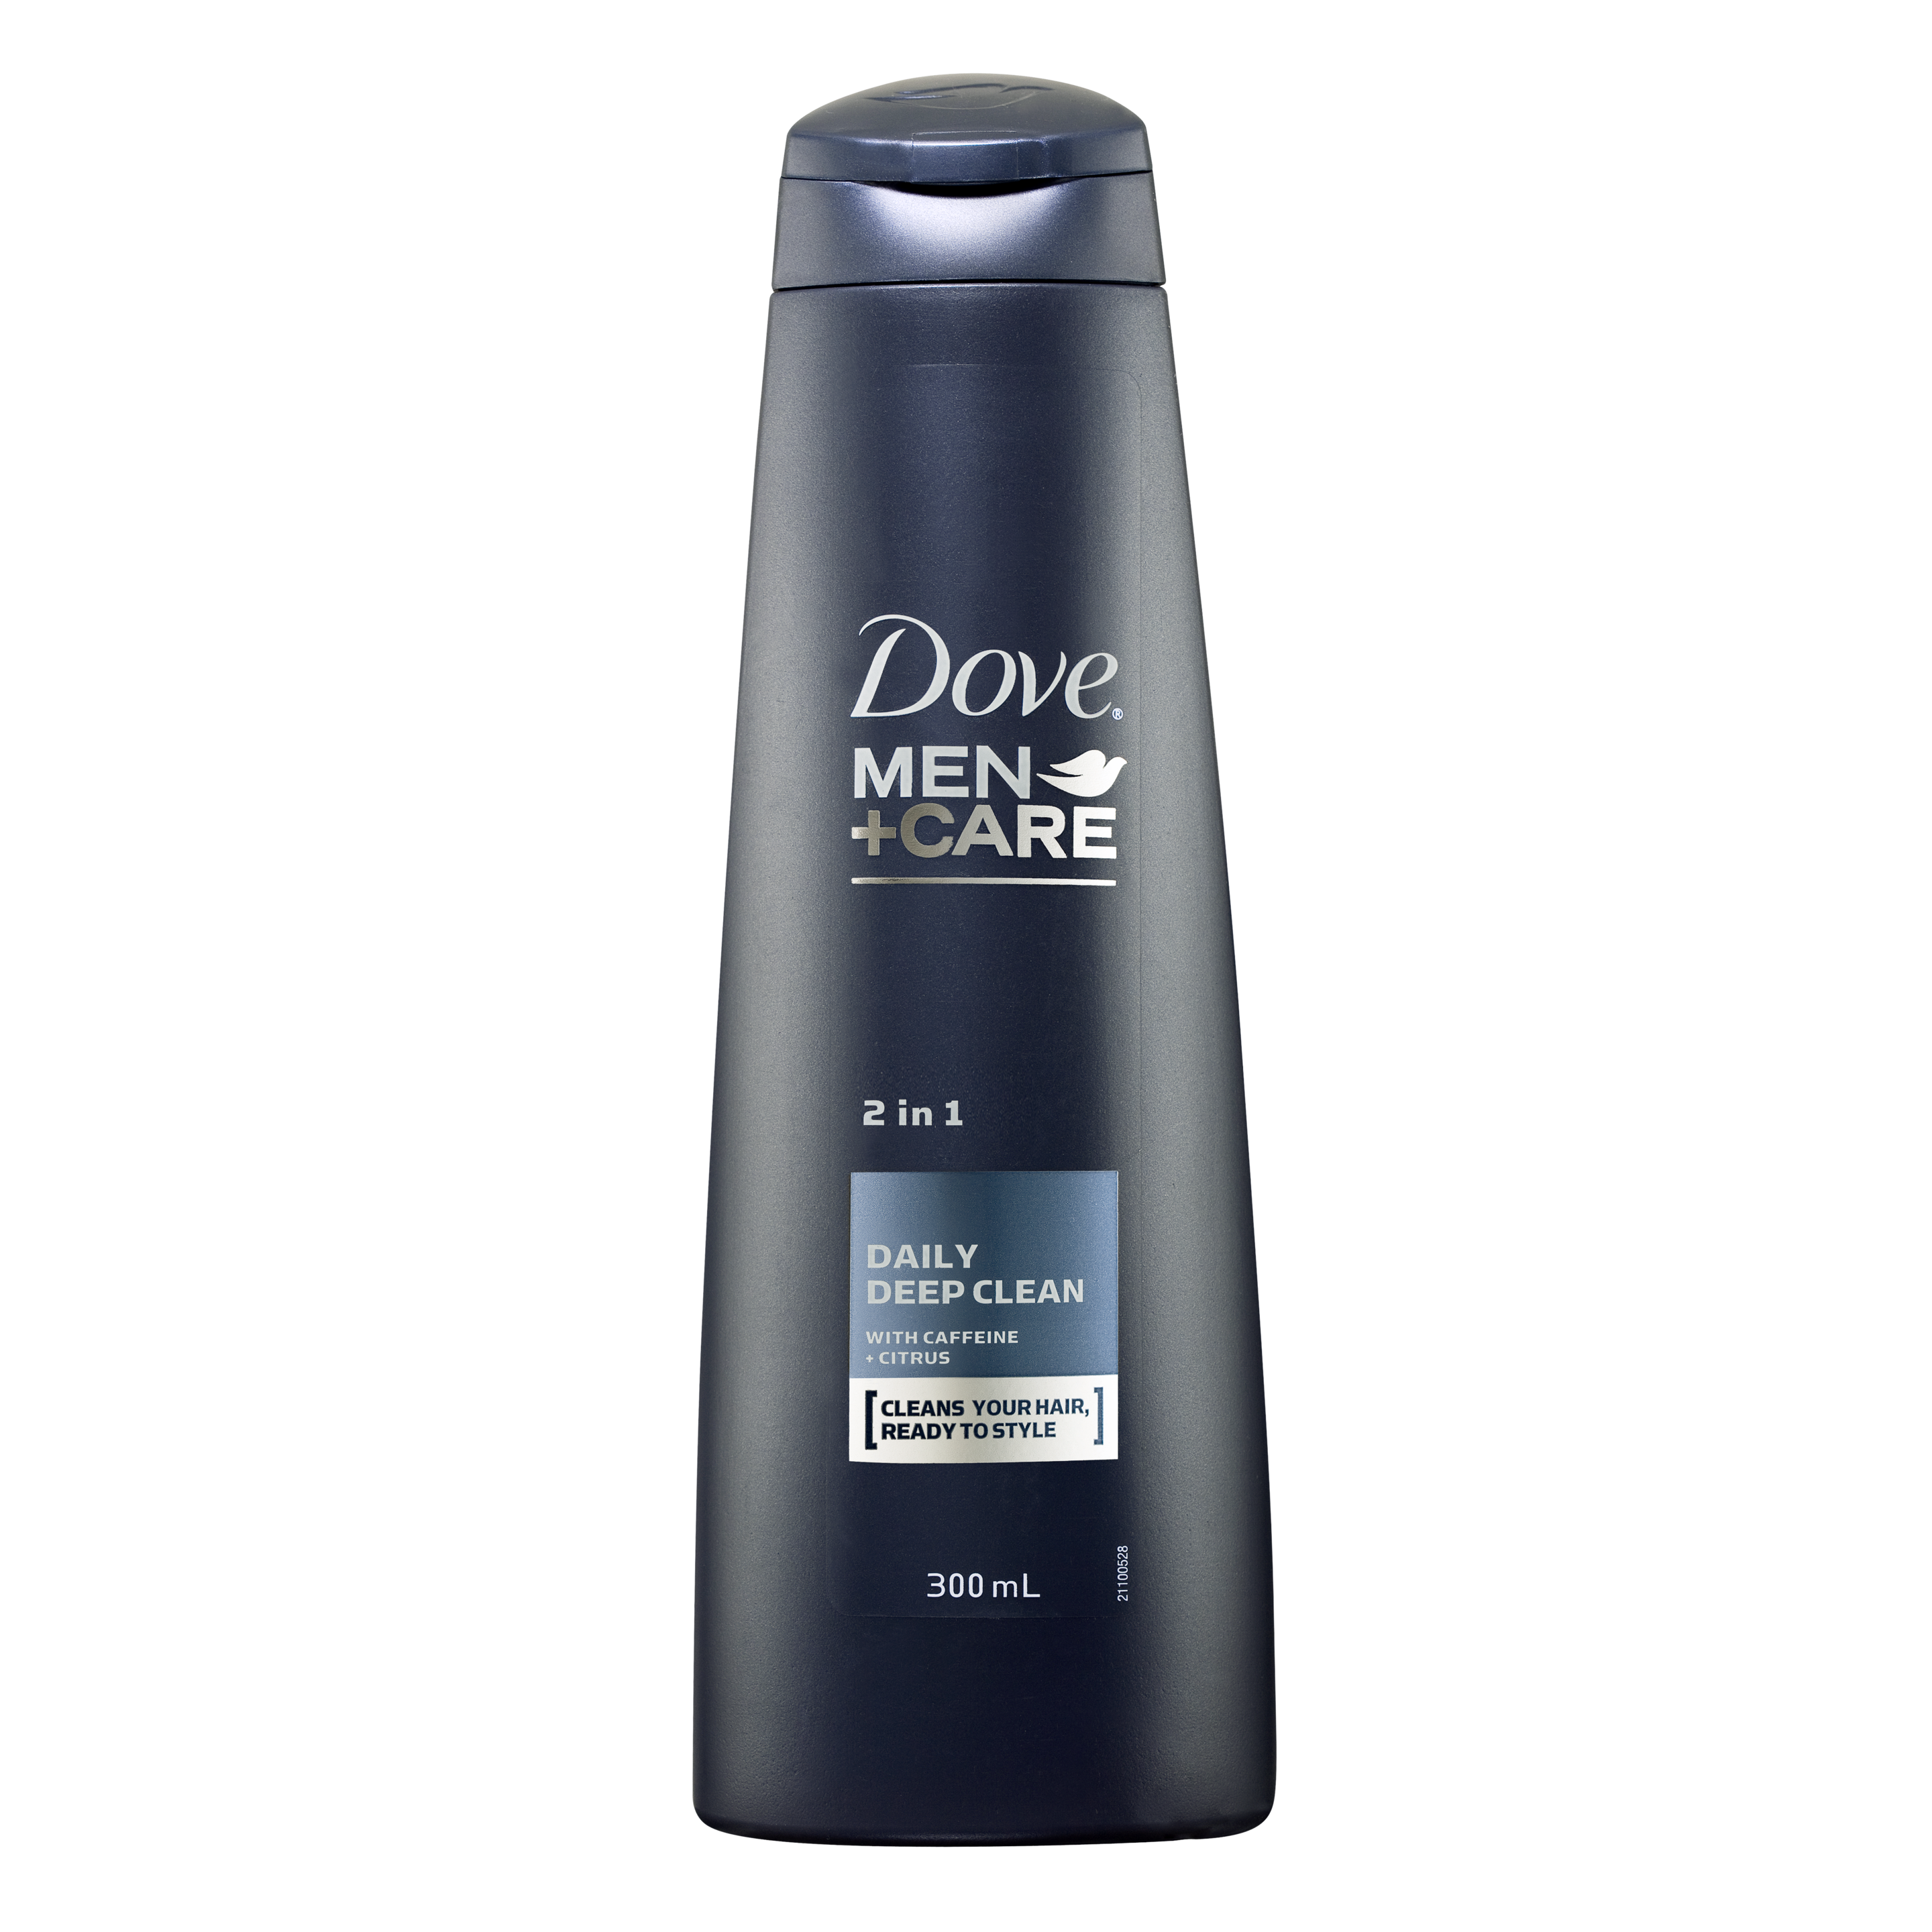 Men+Care Daily Deep Clean Fortifying 2 in 1 Shampoo Text